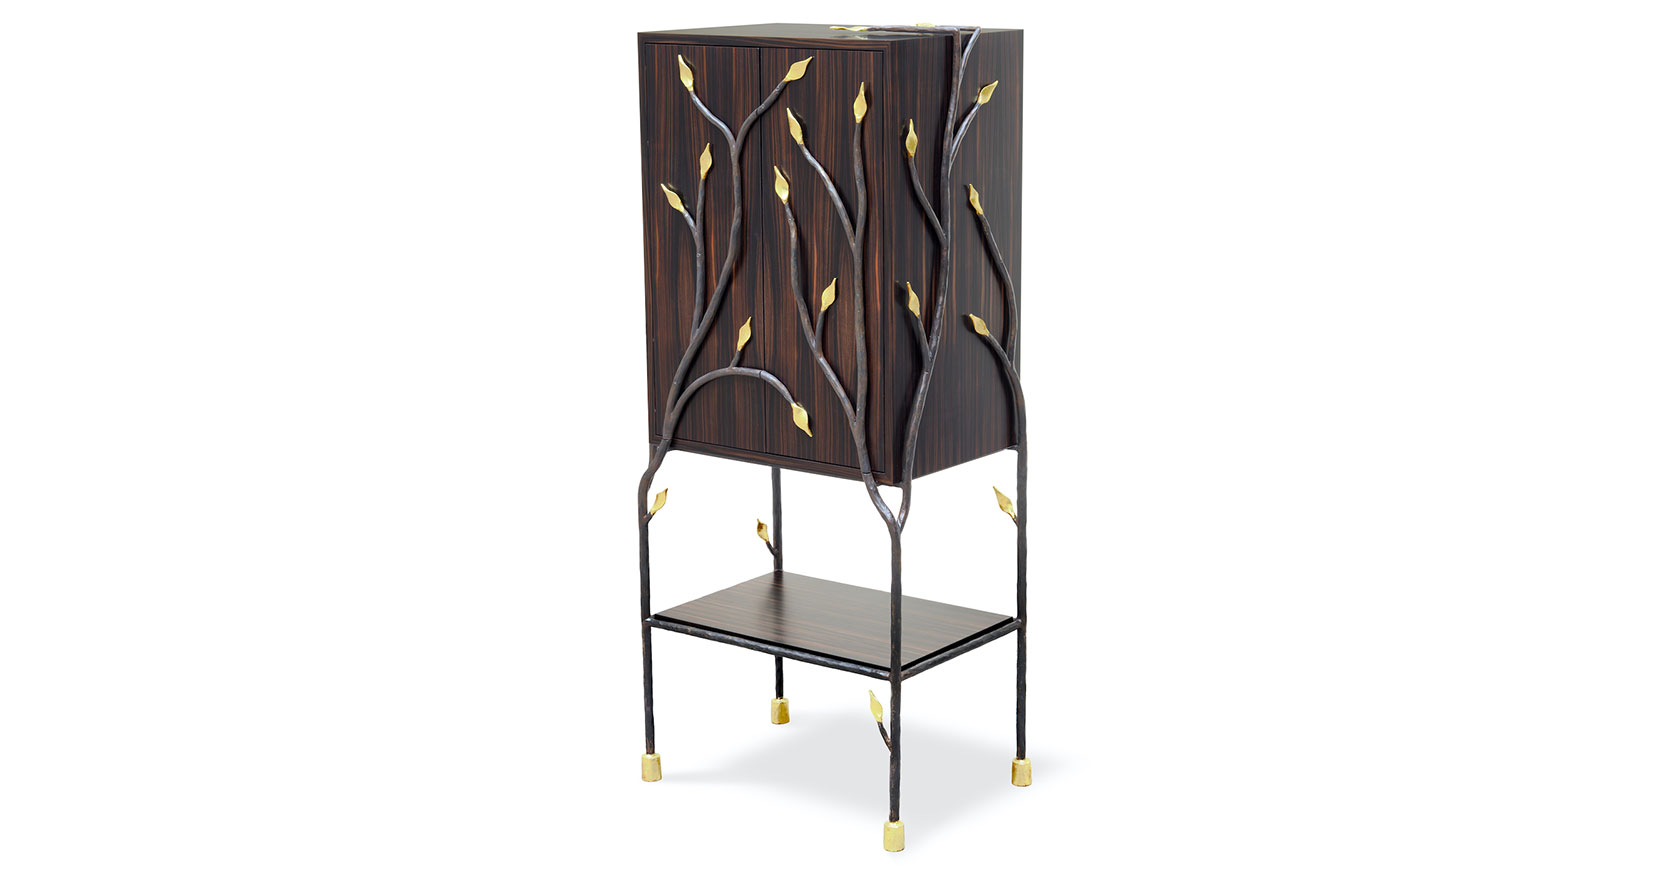 Garouste Bonetti, precious cabinet on black wrought iron feet, two dark wood doors surrounded by black wrought iron branches with gold leaves